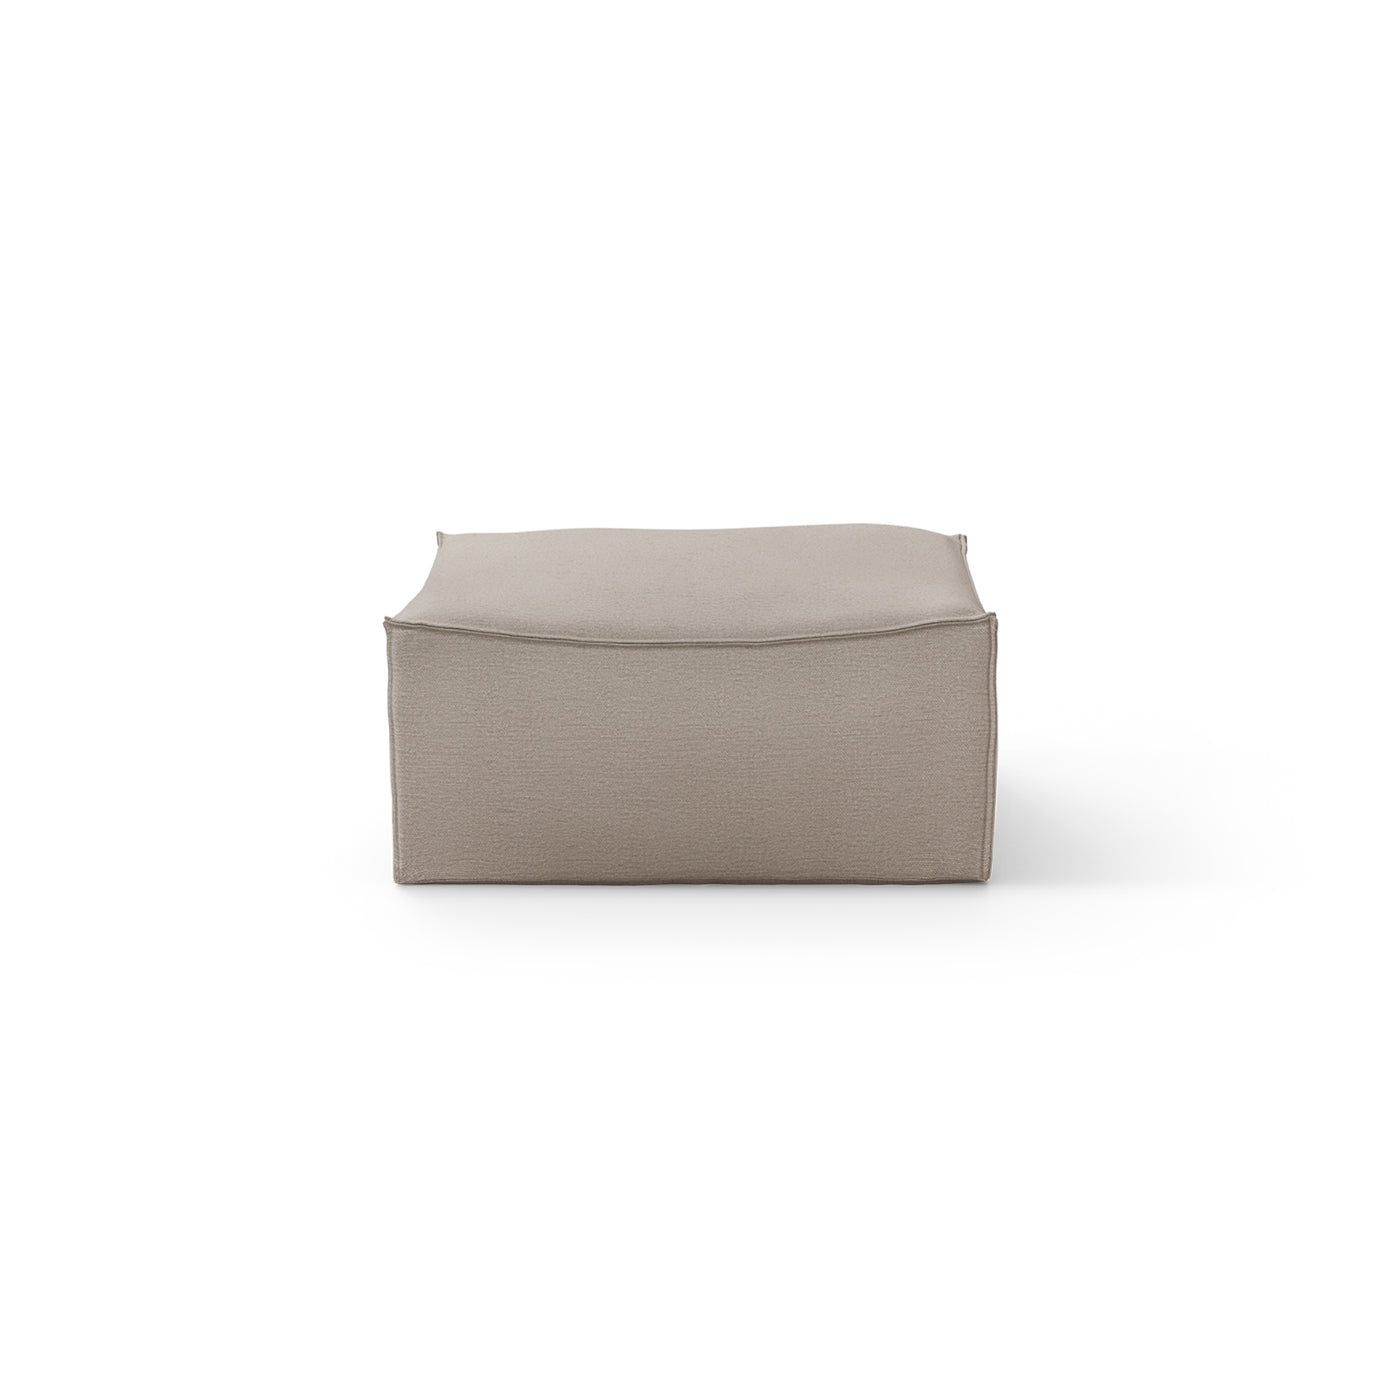 ferm LIVING Catena modular sofa. S500 pouf. Made to order from someday designs. #colour_cotton-linen